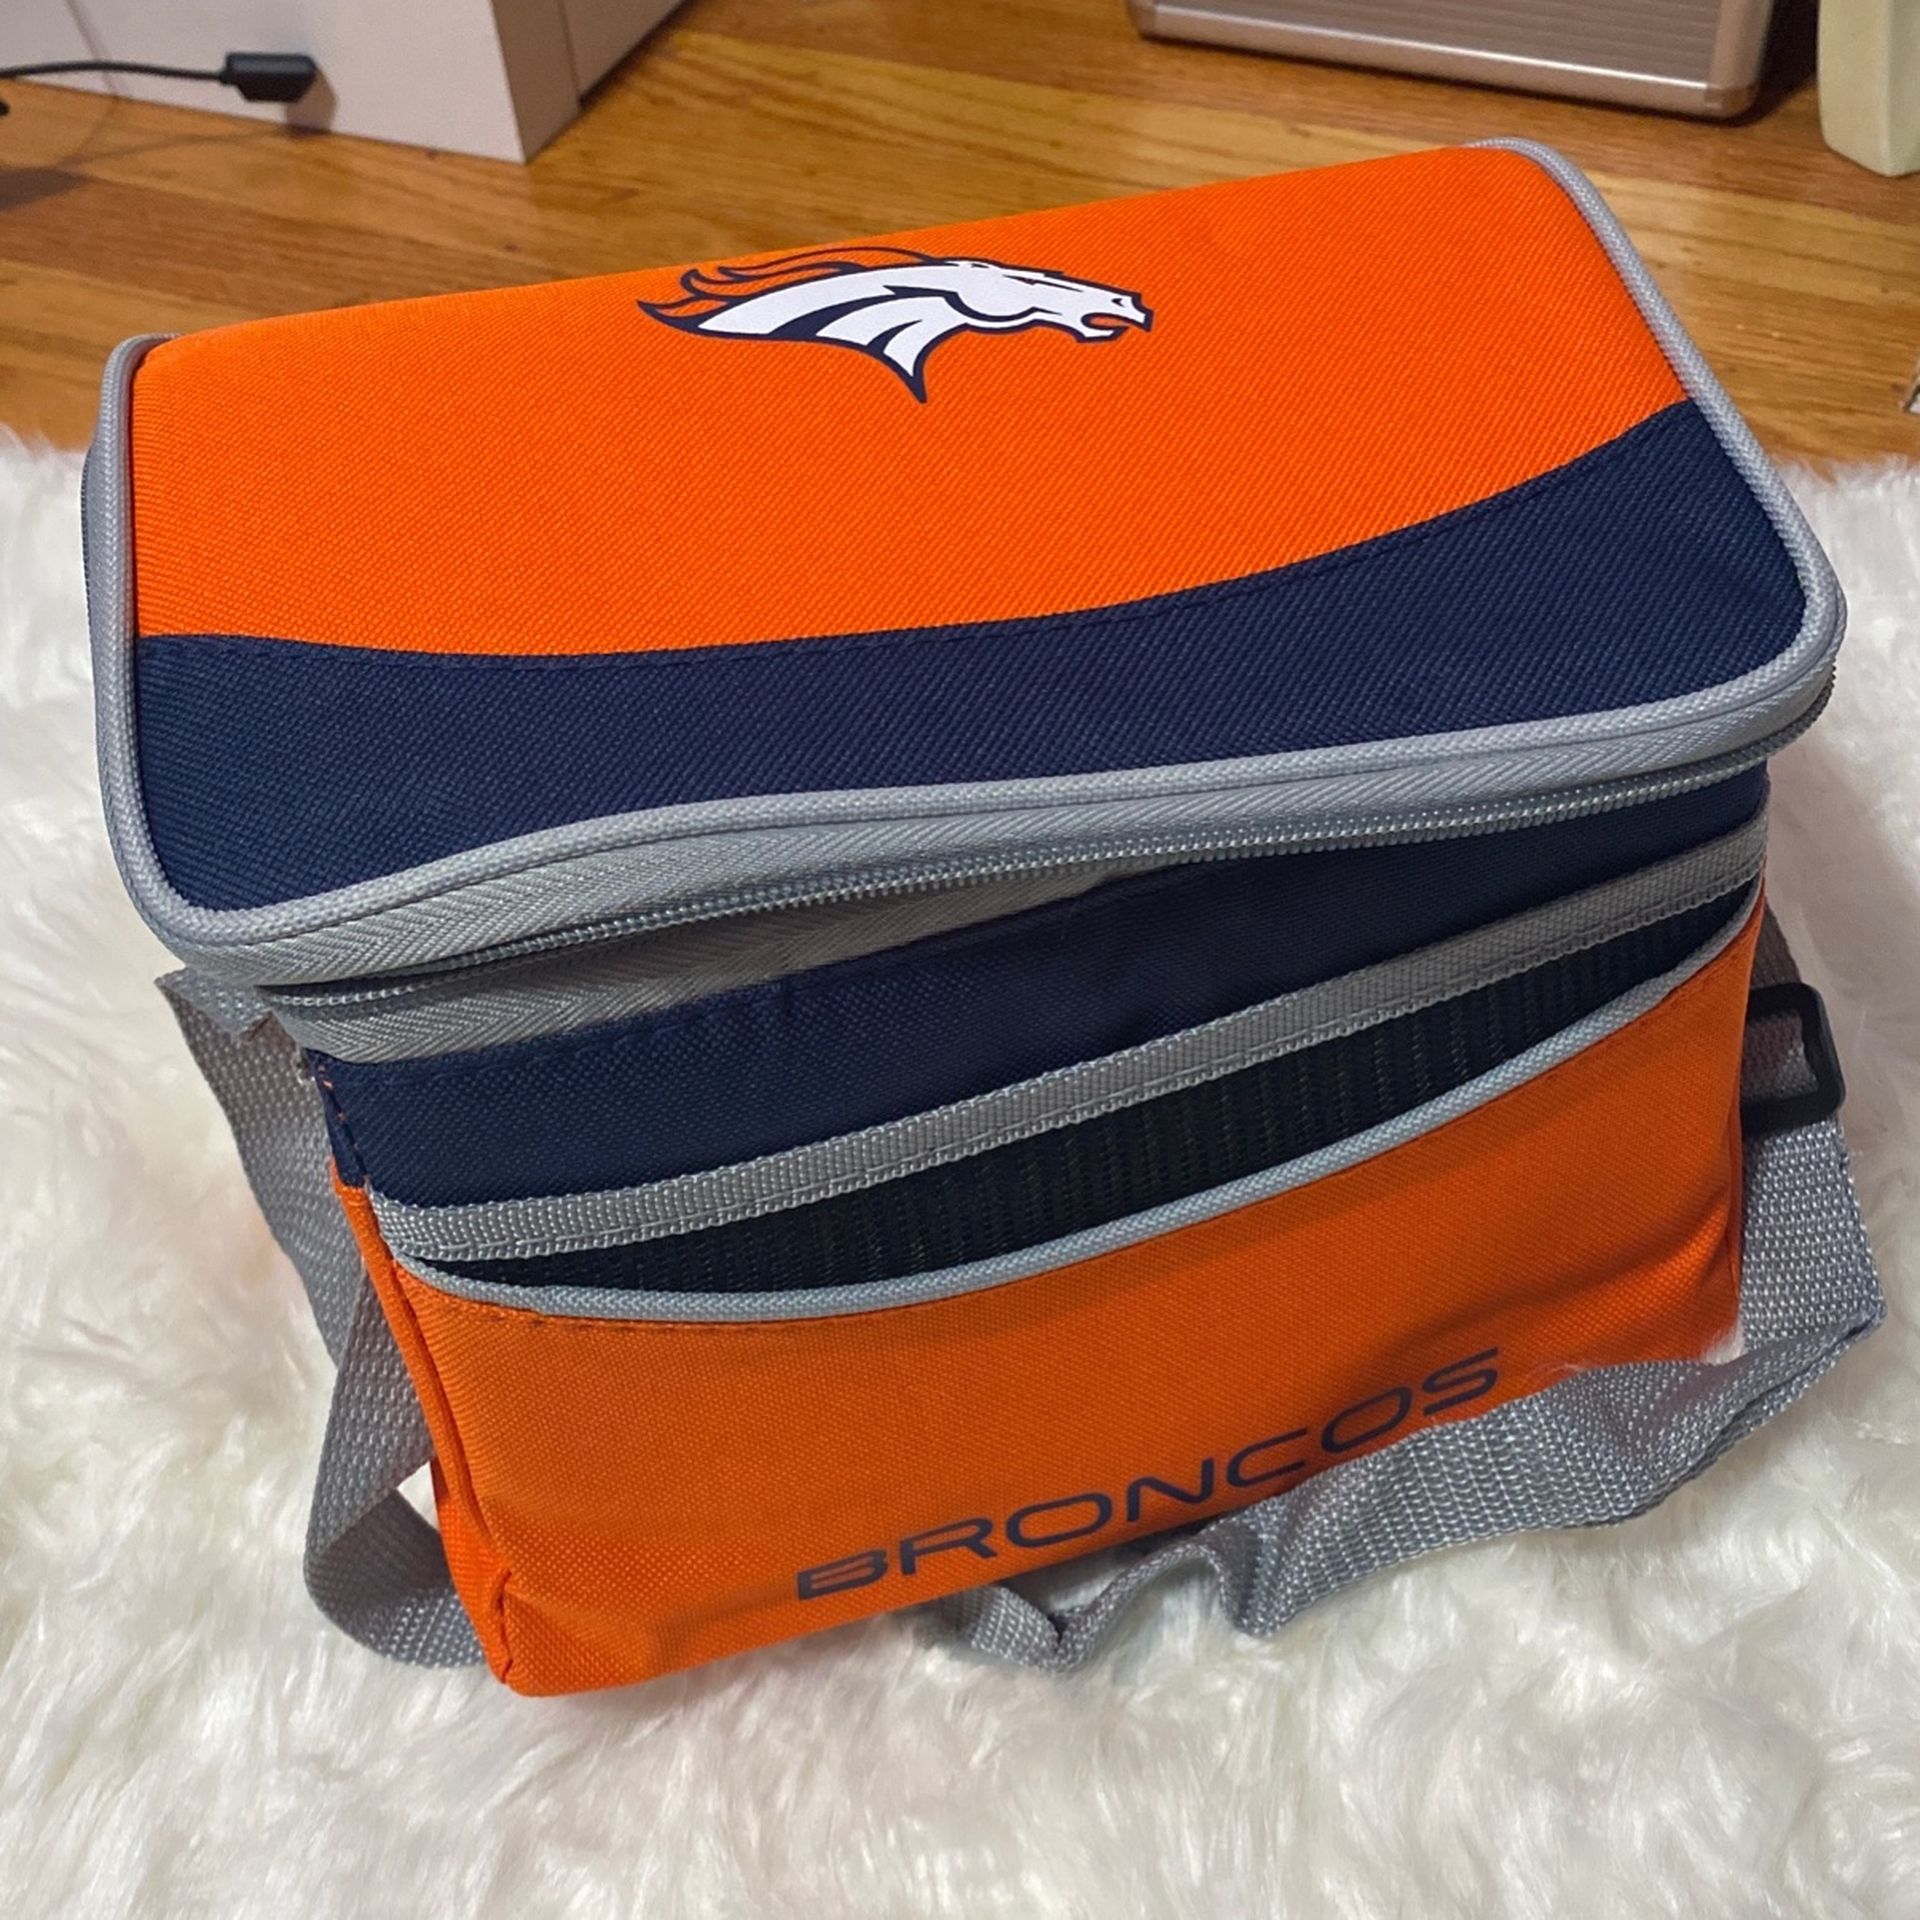 Broncos Small Cooler!